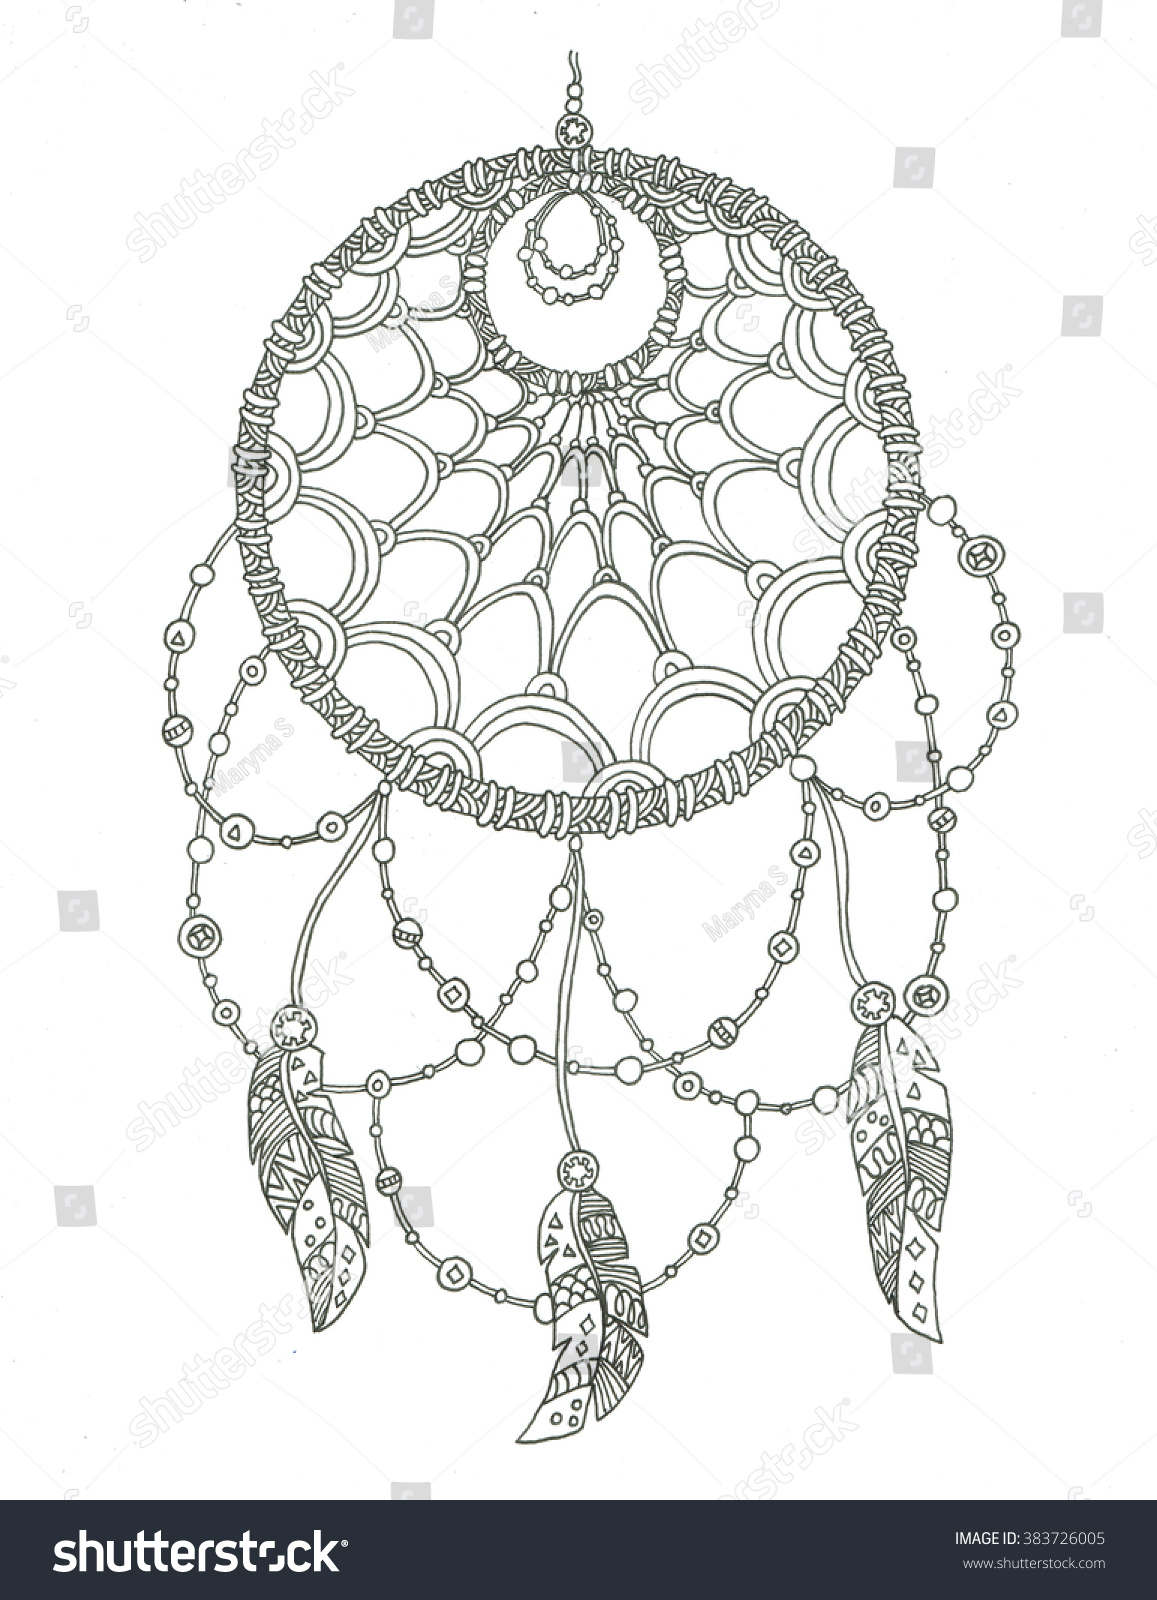 Dream catcher coloring page